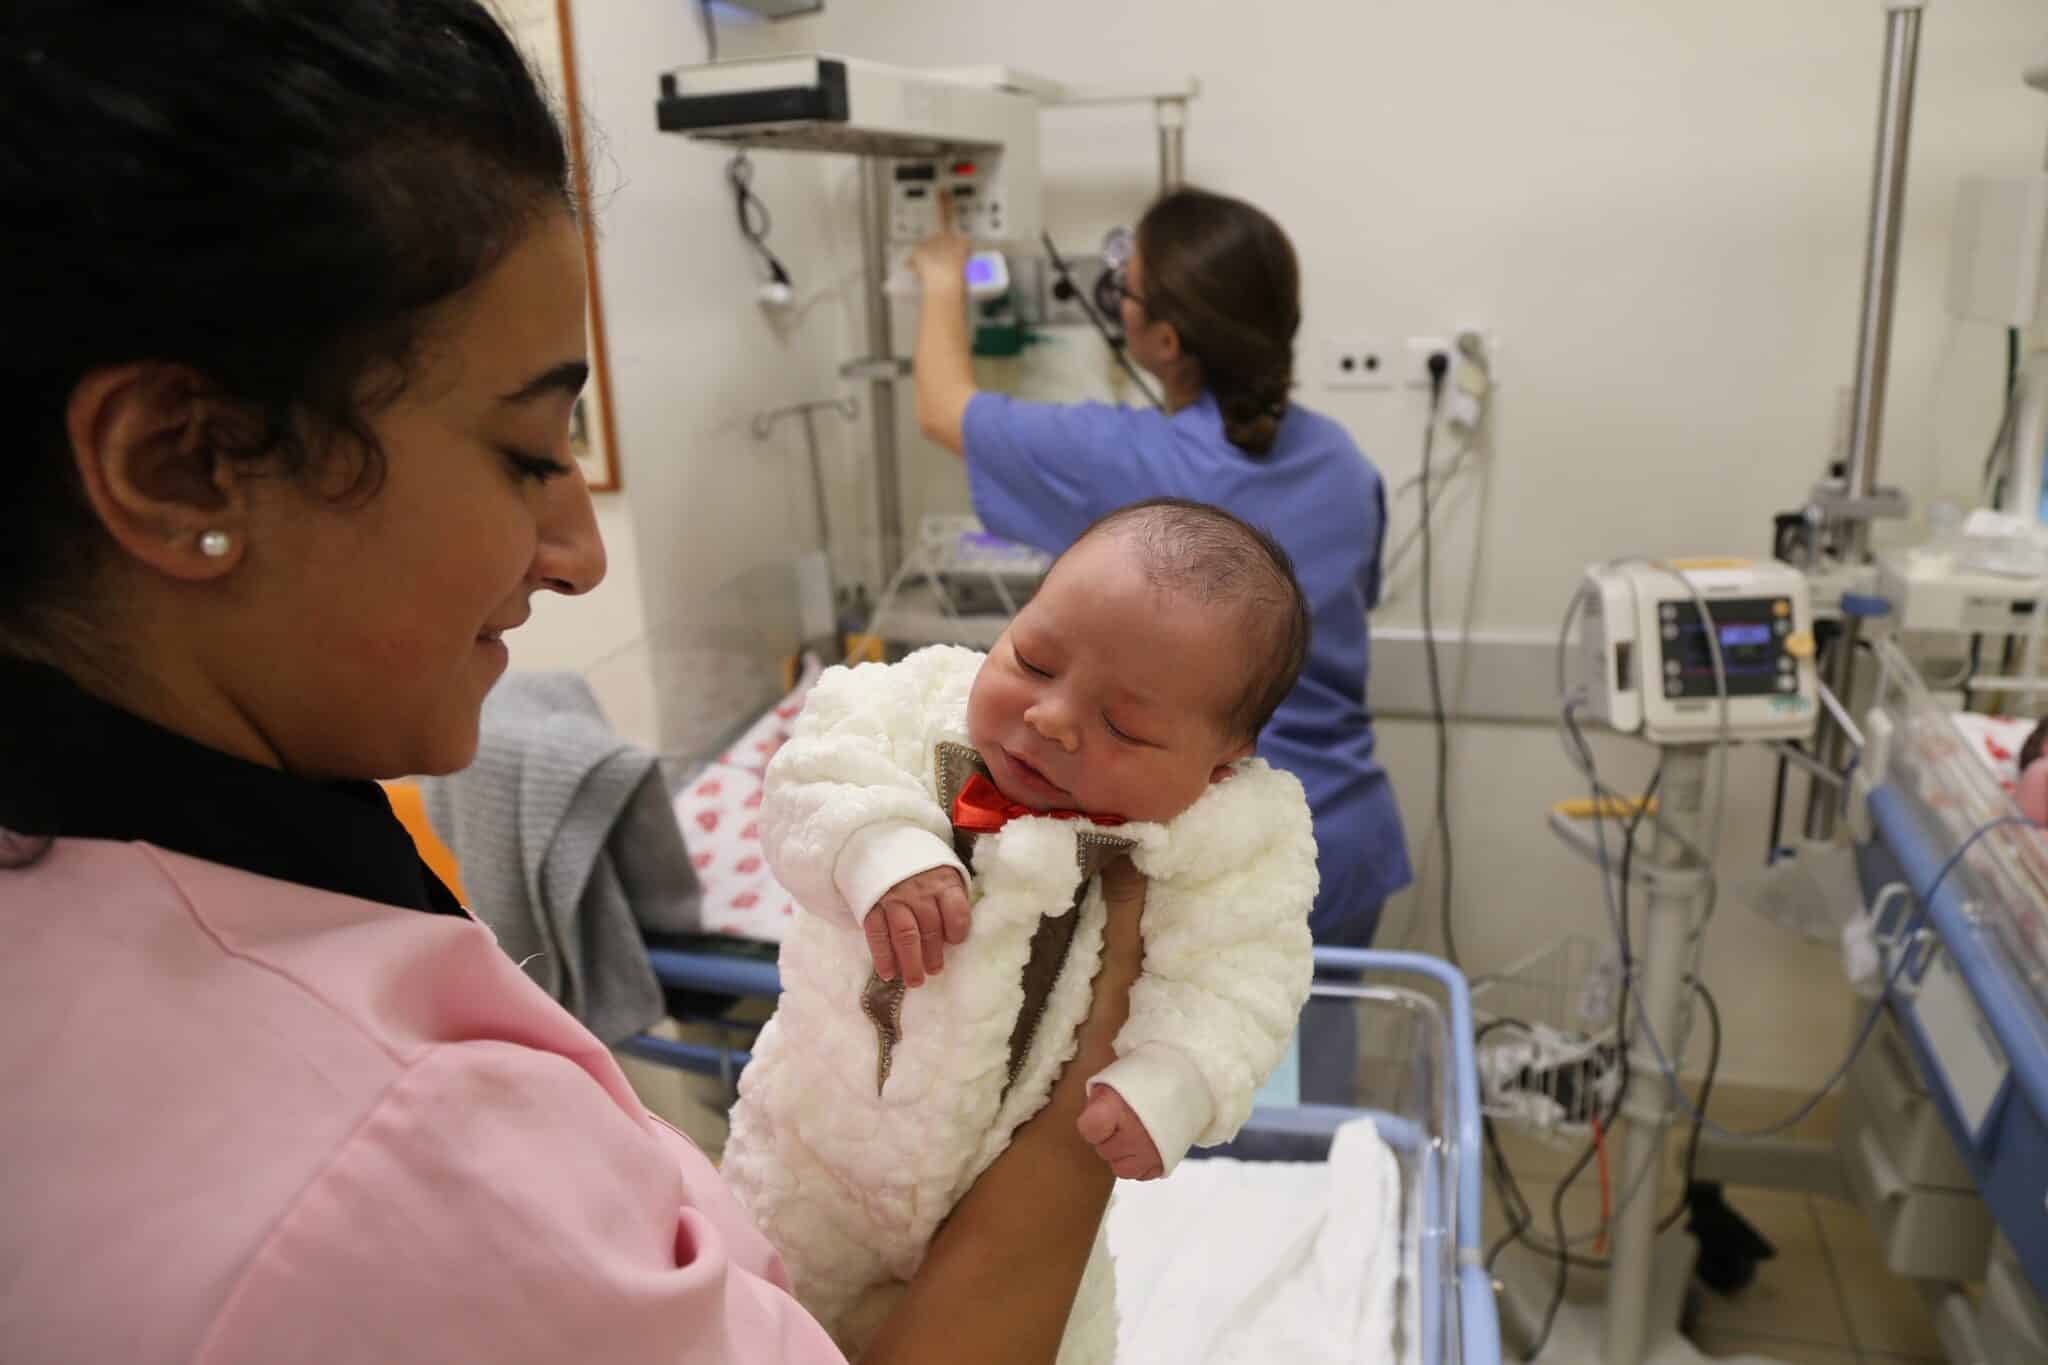 A woman is pictured in a file photo holding a newborn at Holy Land Family Hospital of Bethlehem in the West Bank. The hospital, located just 1,500 steps from the birthplace of Christ, is confronting significant challenges amid the ongoing war between Israel and Hamas in the Gaza Strip 45 miles away. (OSV News photo/courtesy HFH Foundation)